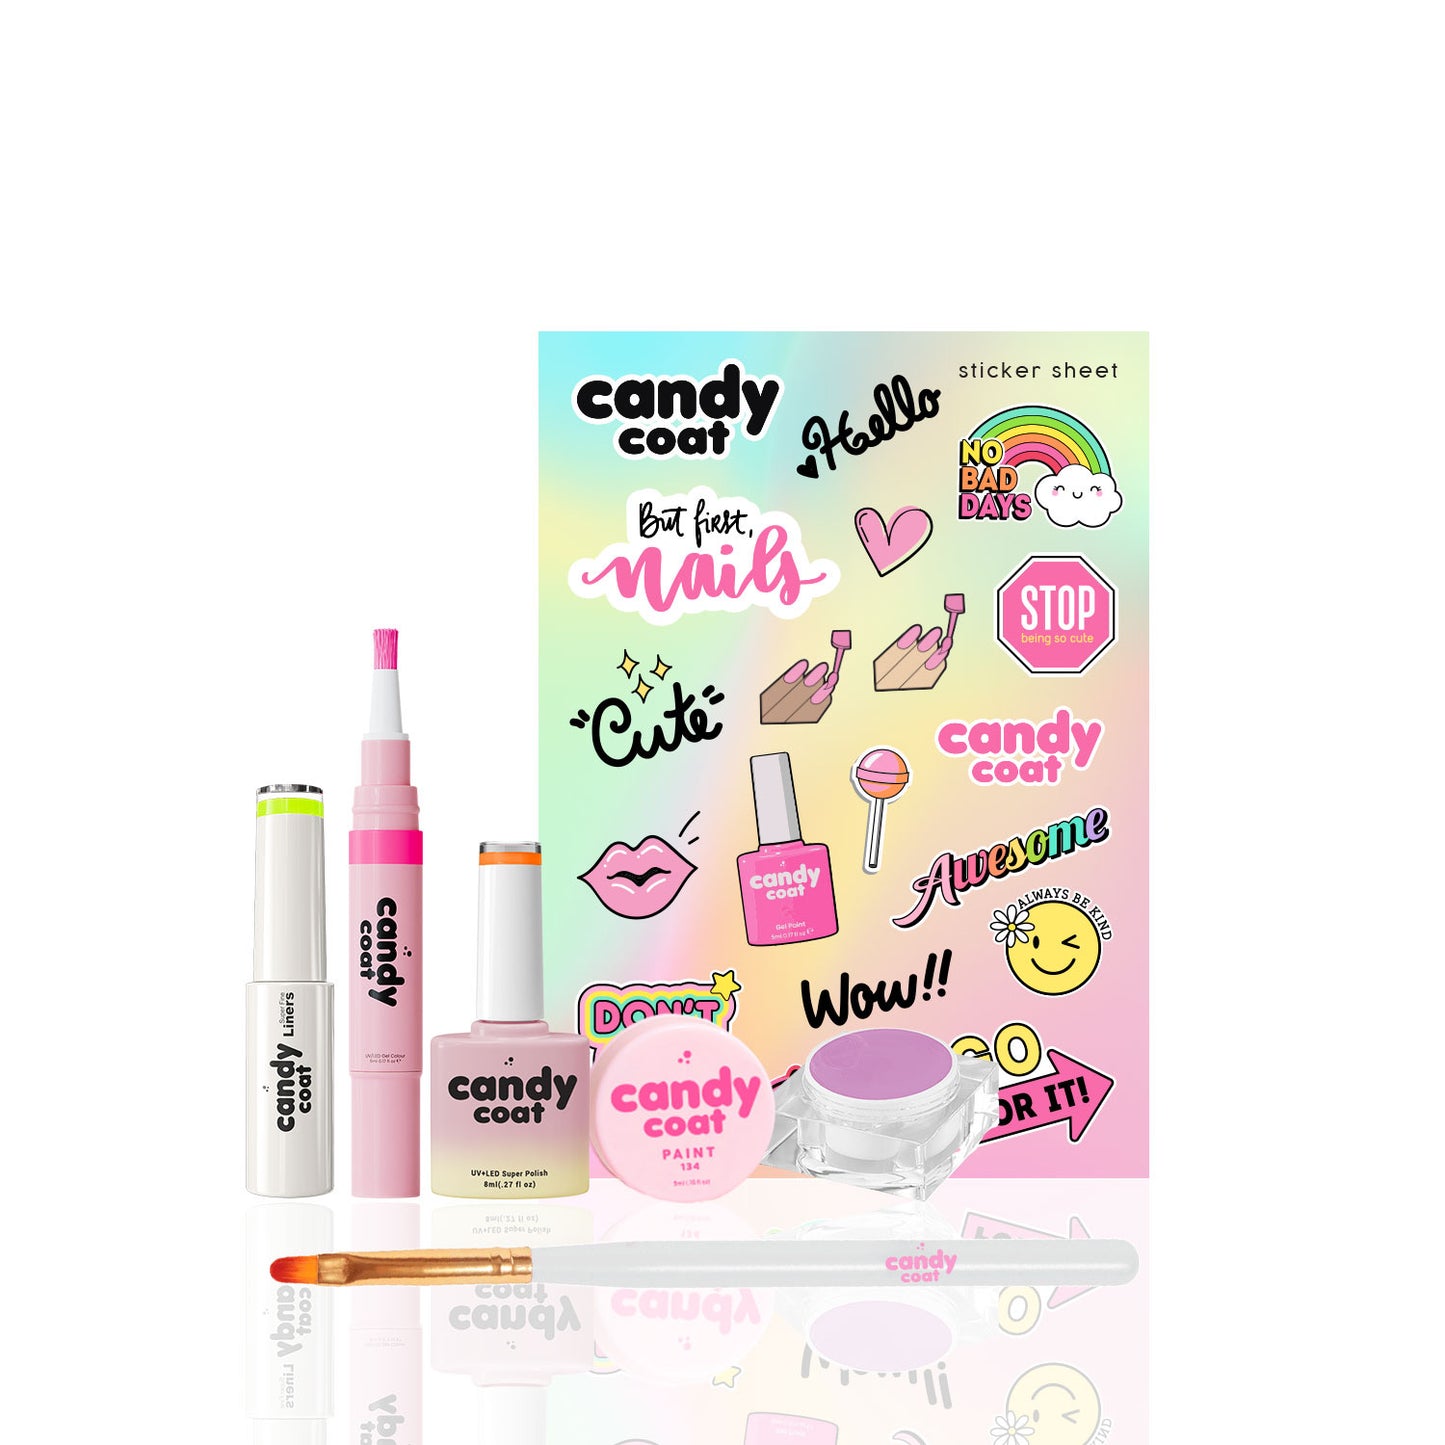 Candy Coat - Discovery Box - Candy Coat